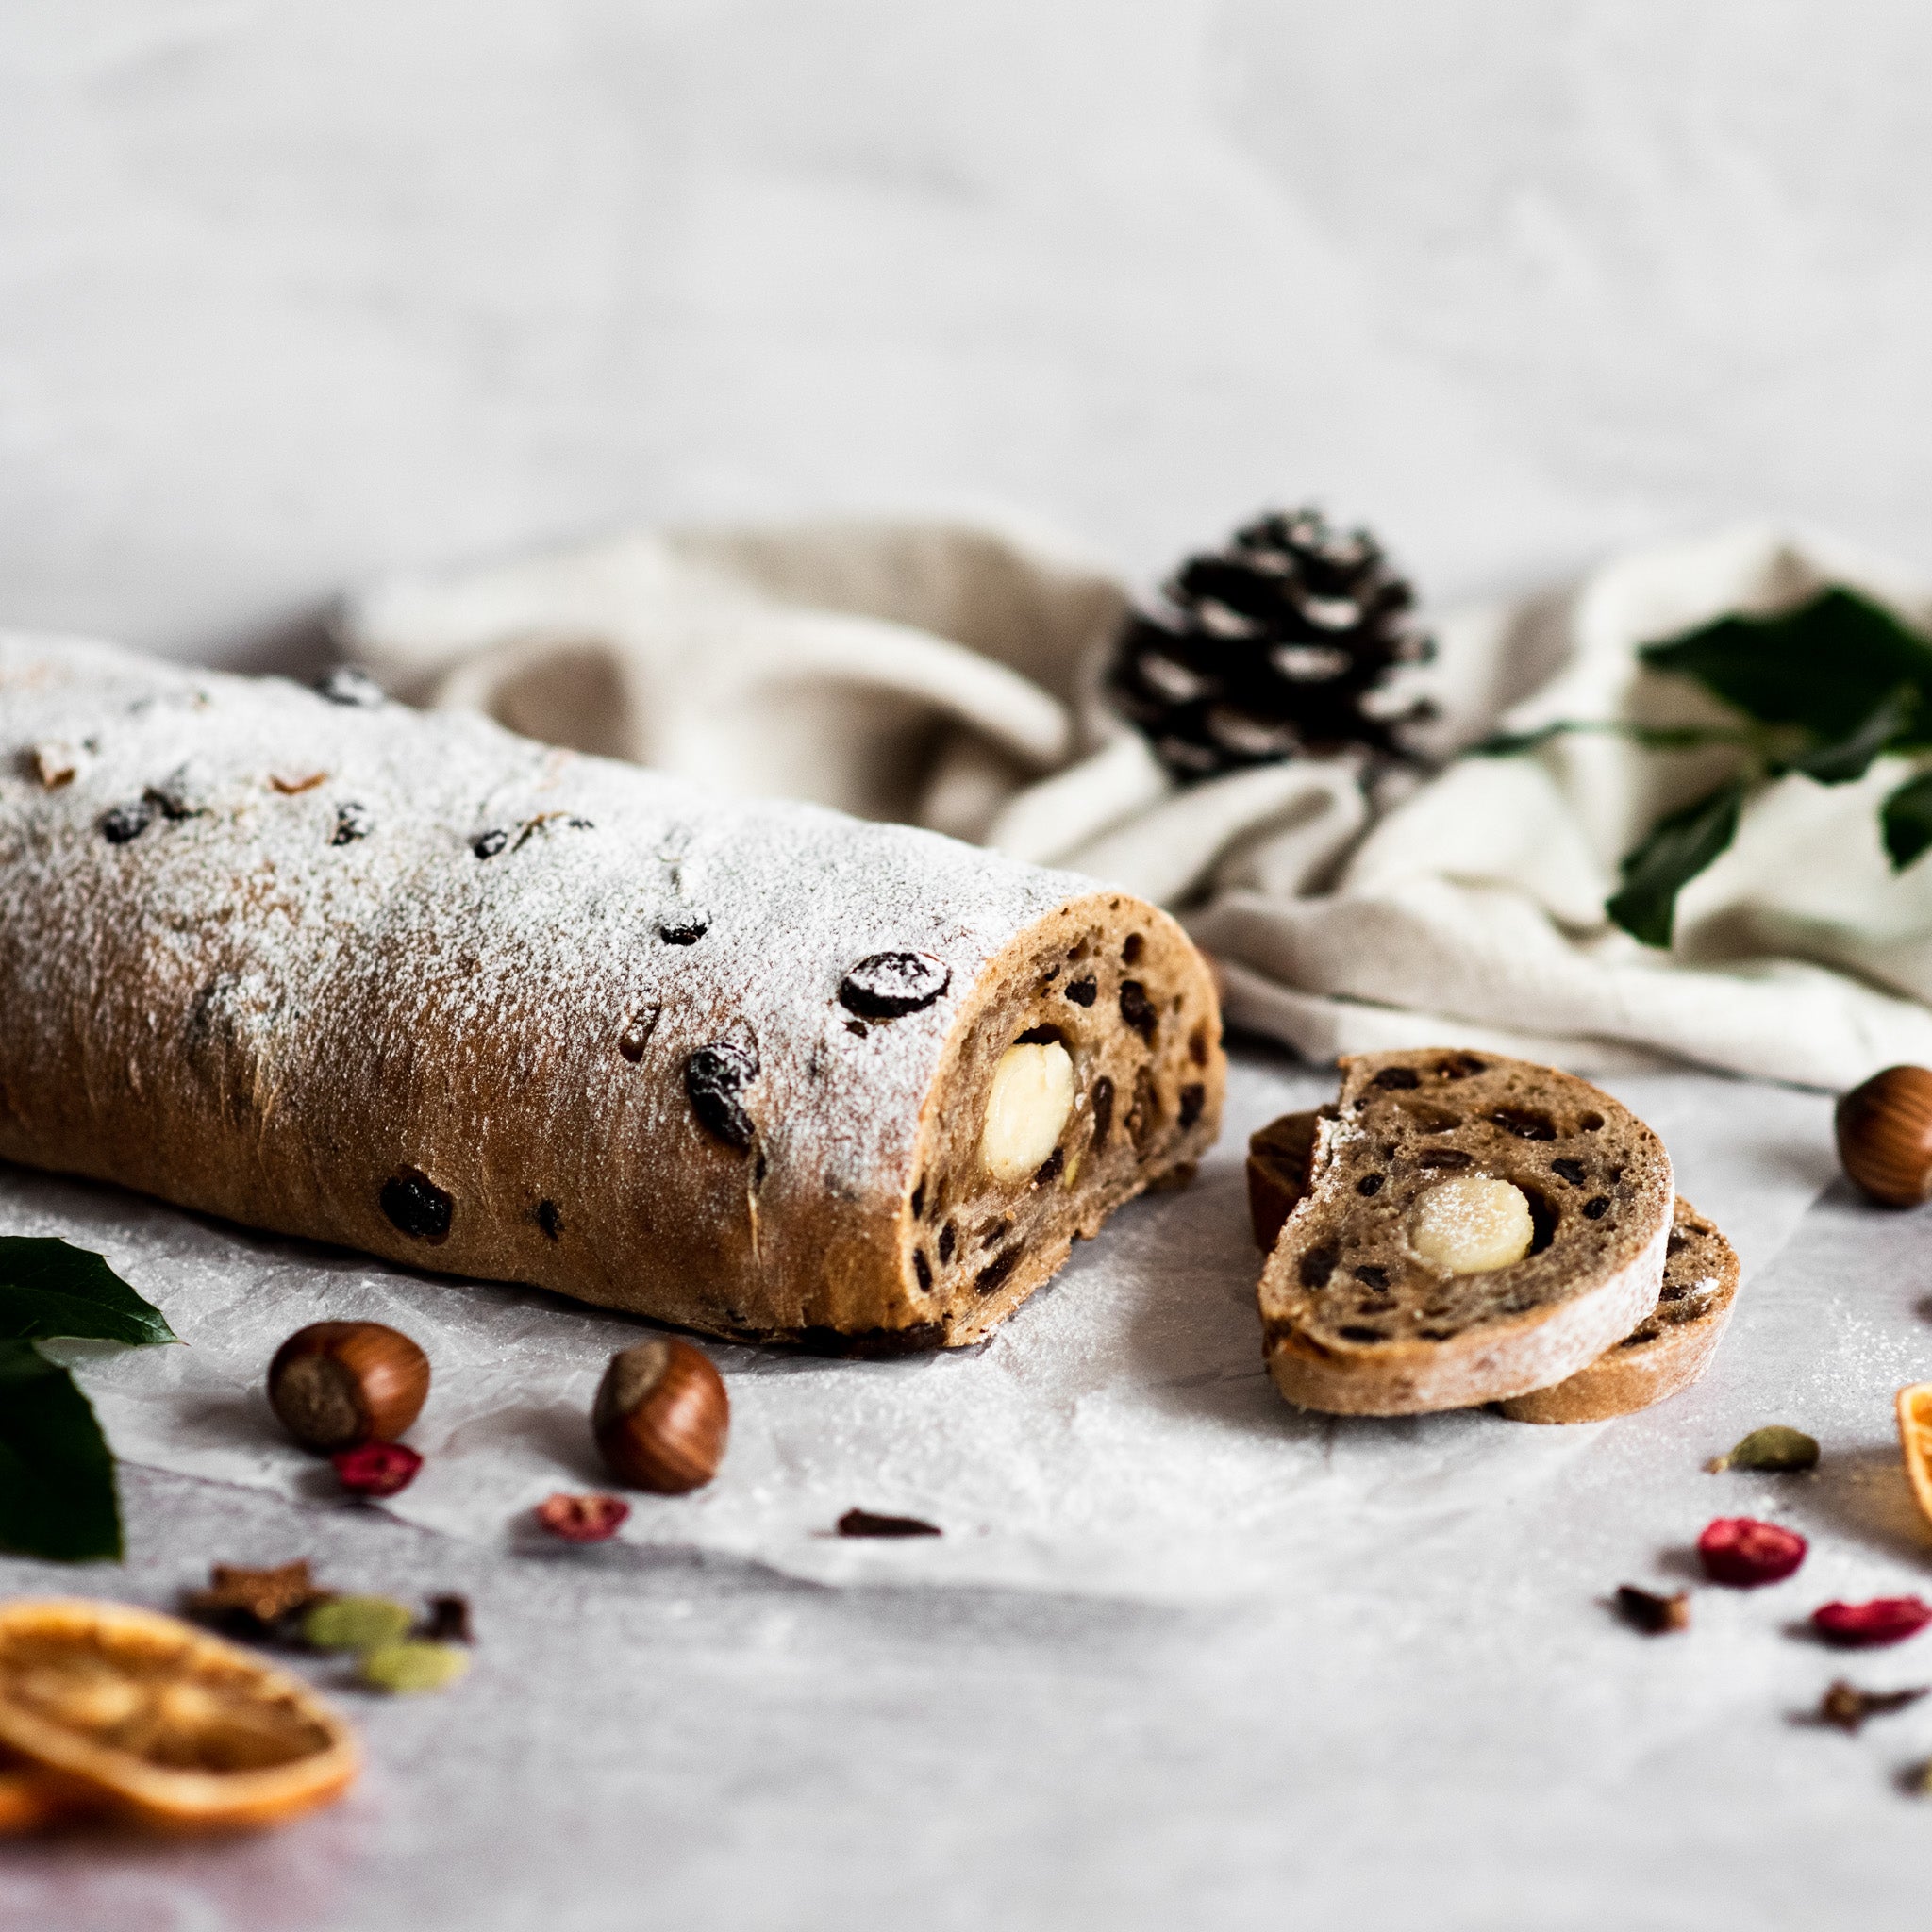 Vegan stollen with a slice removed showing marzipan in the middle